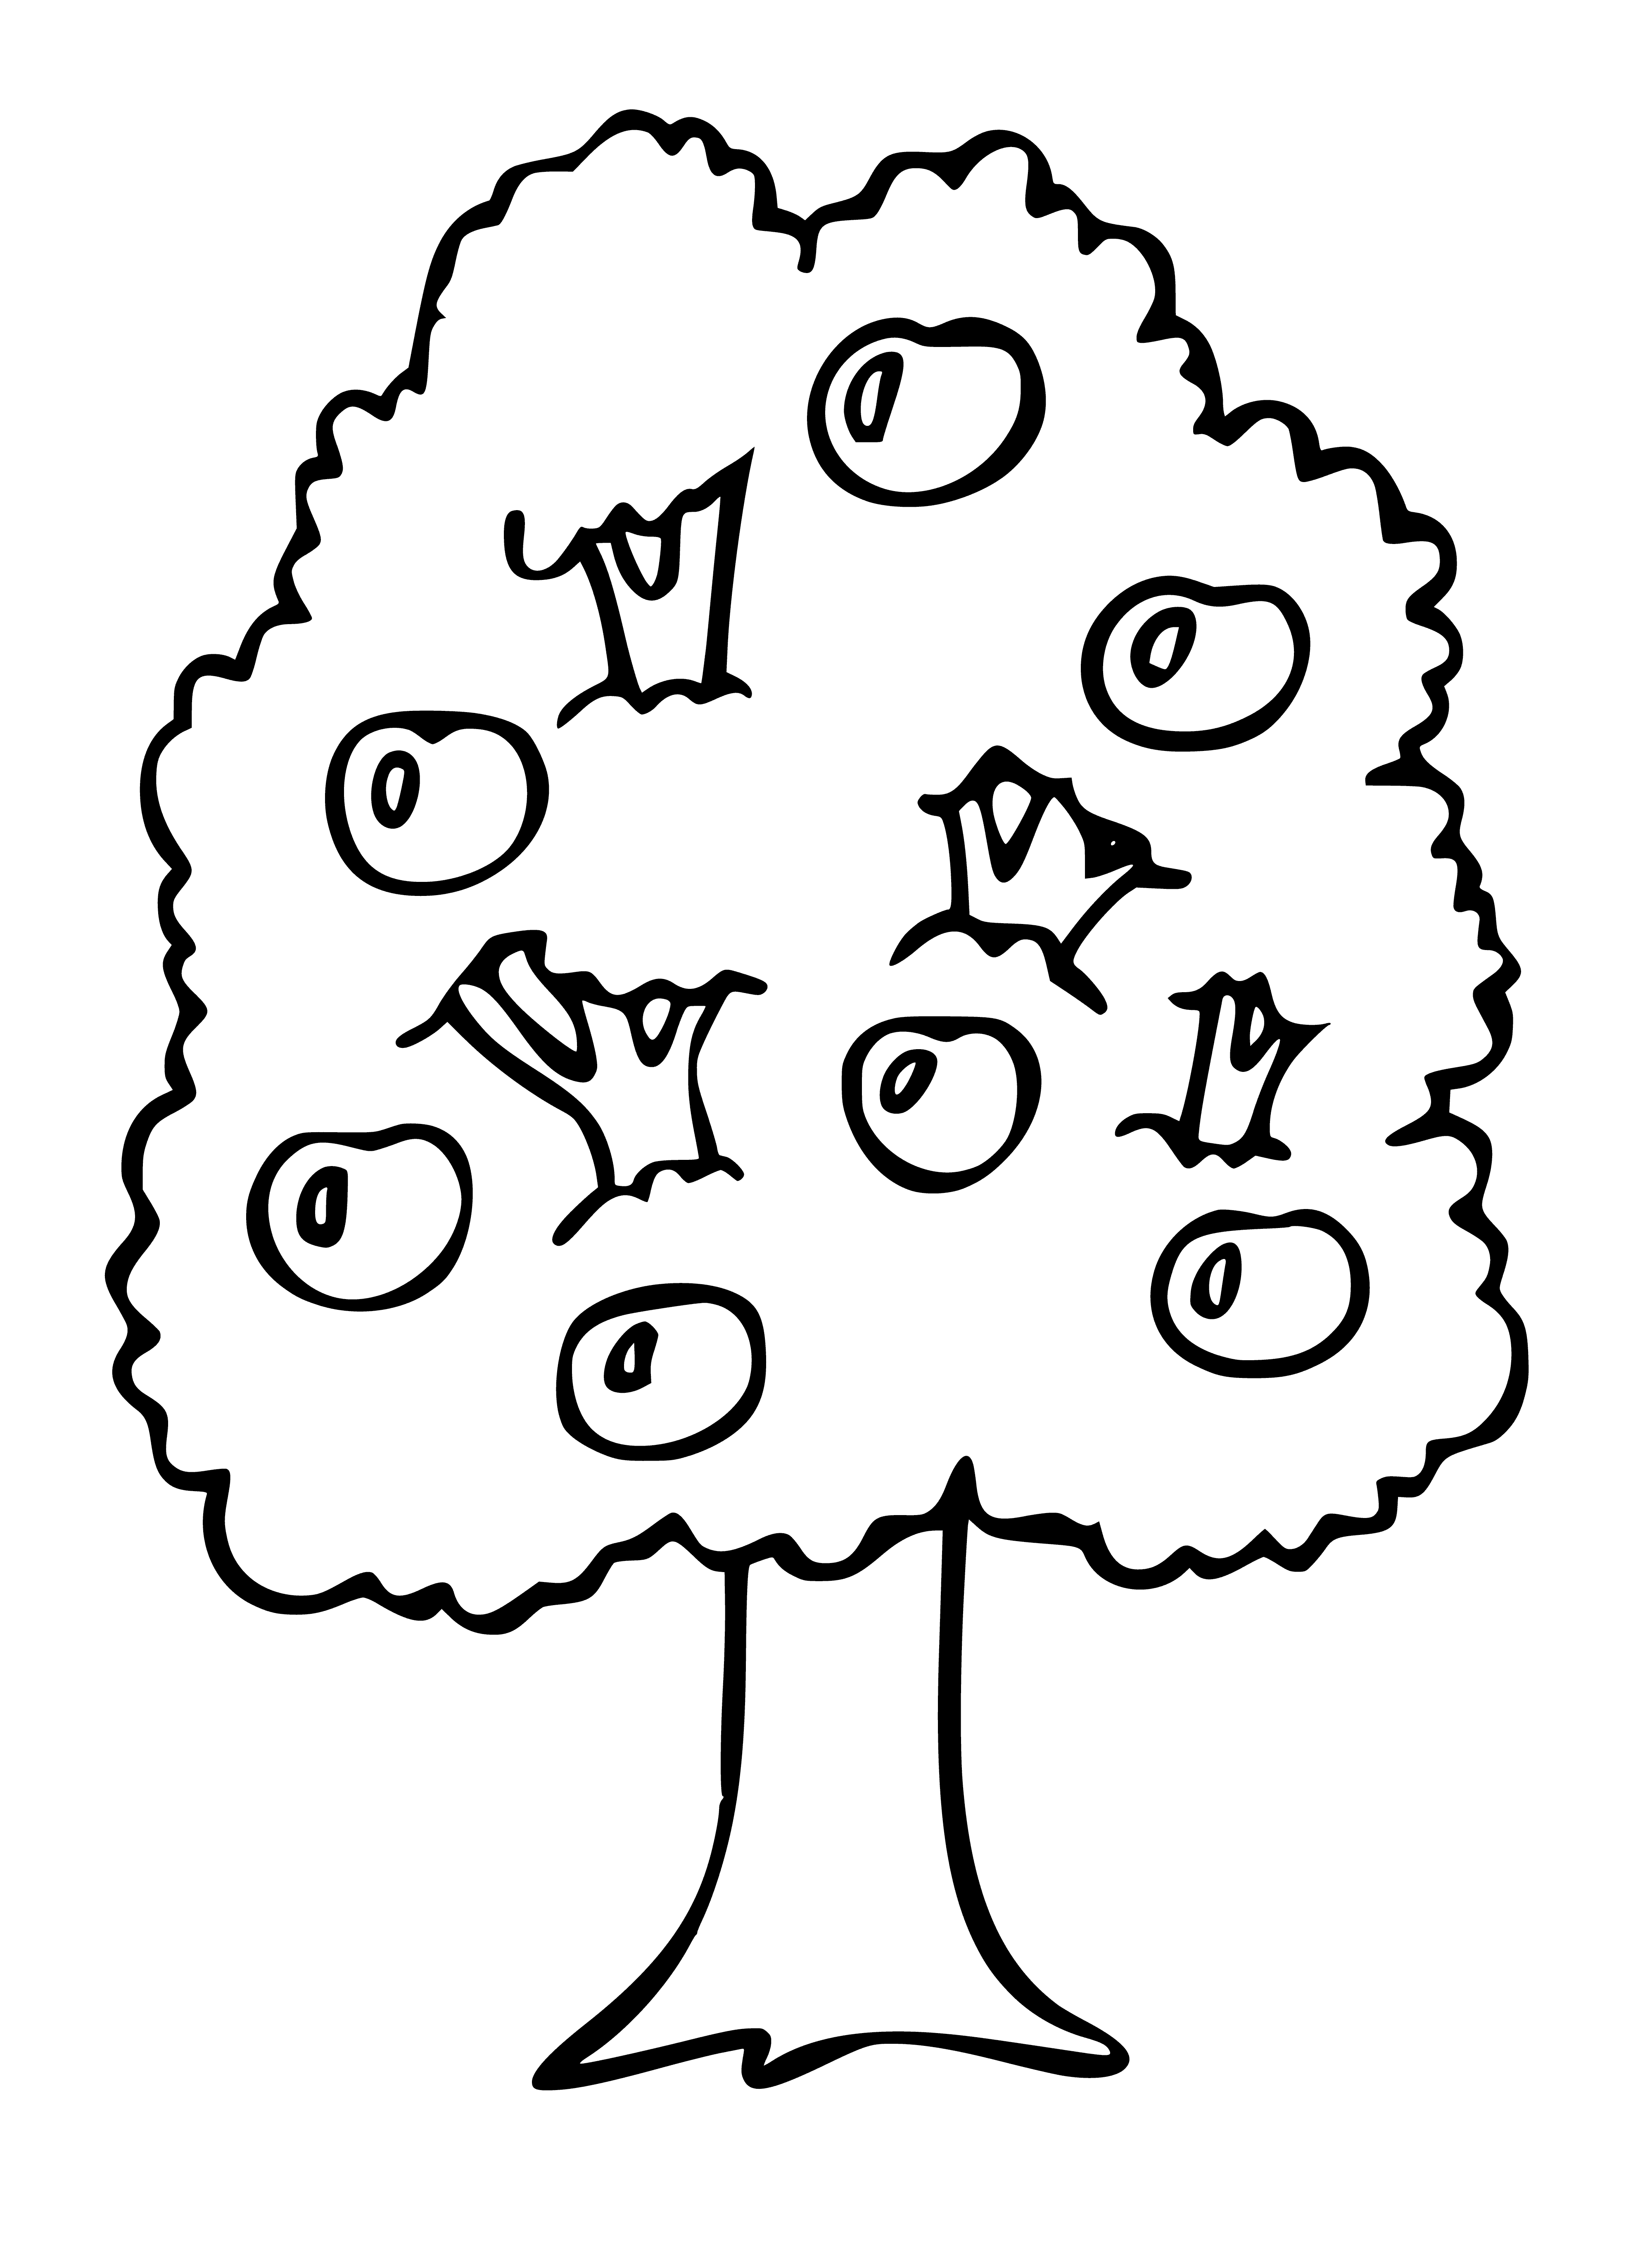 coloring page: Big apple tree w/green leaves & red apples in a field of green grass.